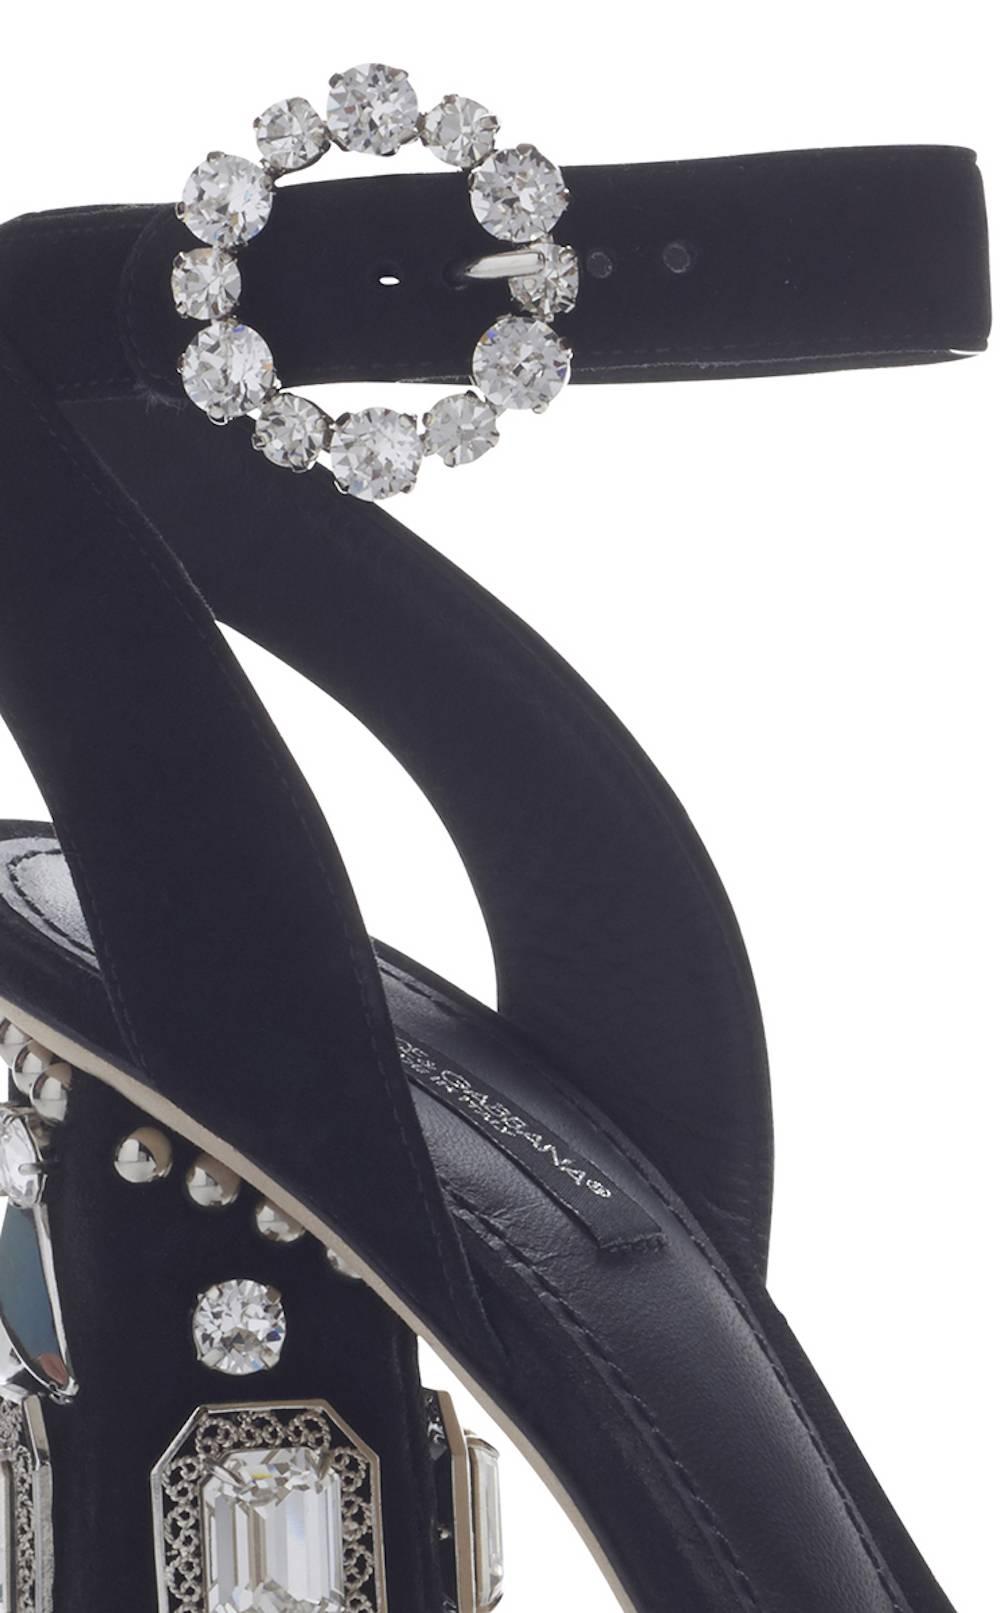 CURATOR'S NOTES

Dolce & Gabbana New Sold Out Black Crystal Embellished Evening Sandals Heels in Box  

Size IT 36
Velvet
Crystal
Ankle strap closure
Made in Italy
Heel height 4